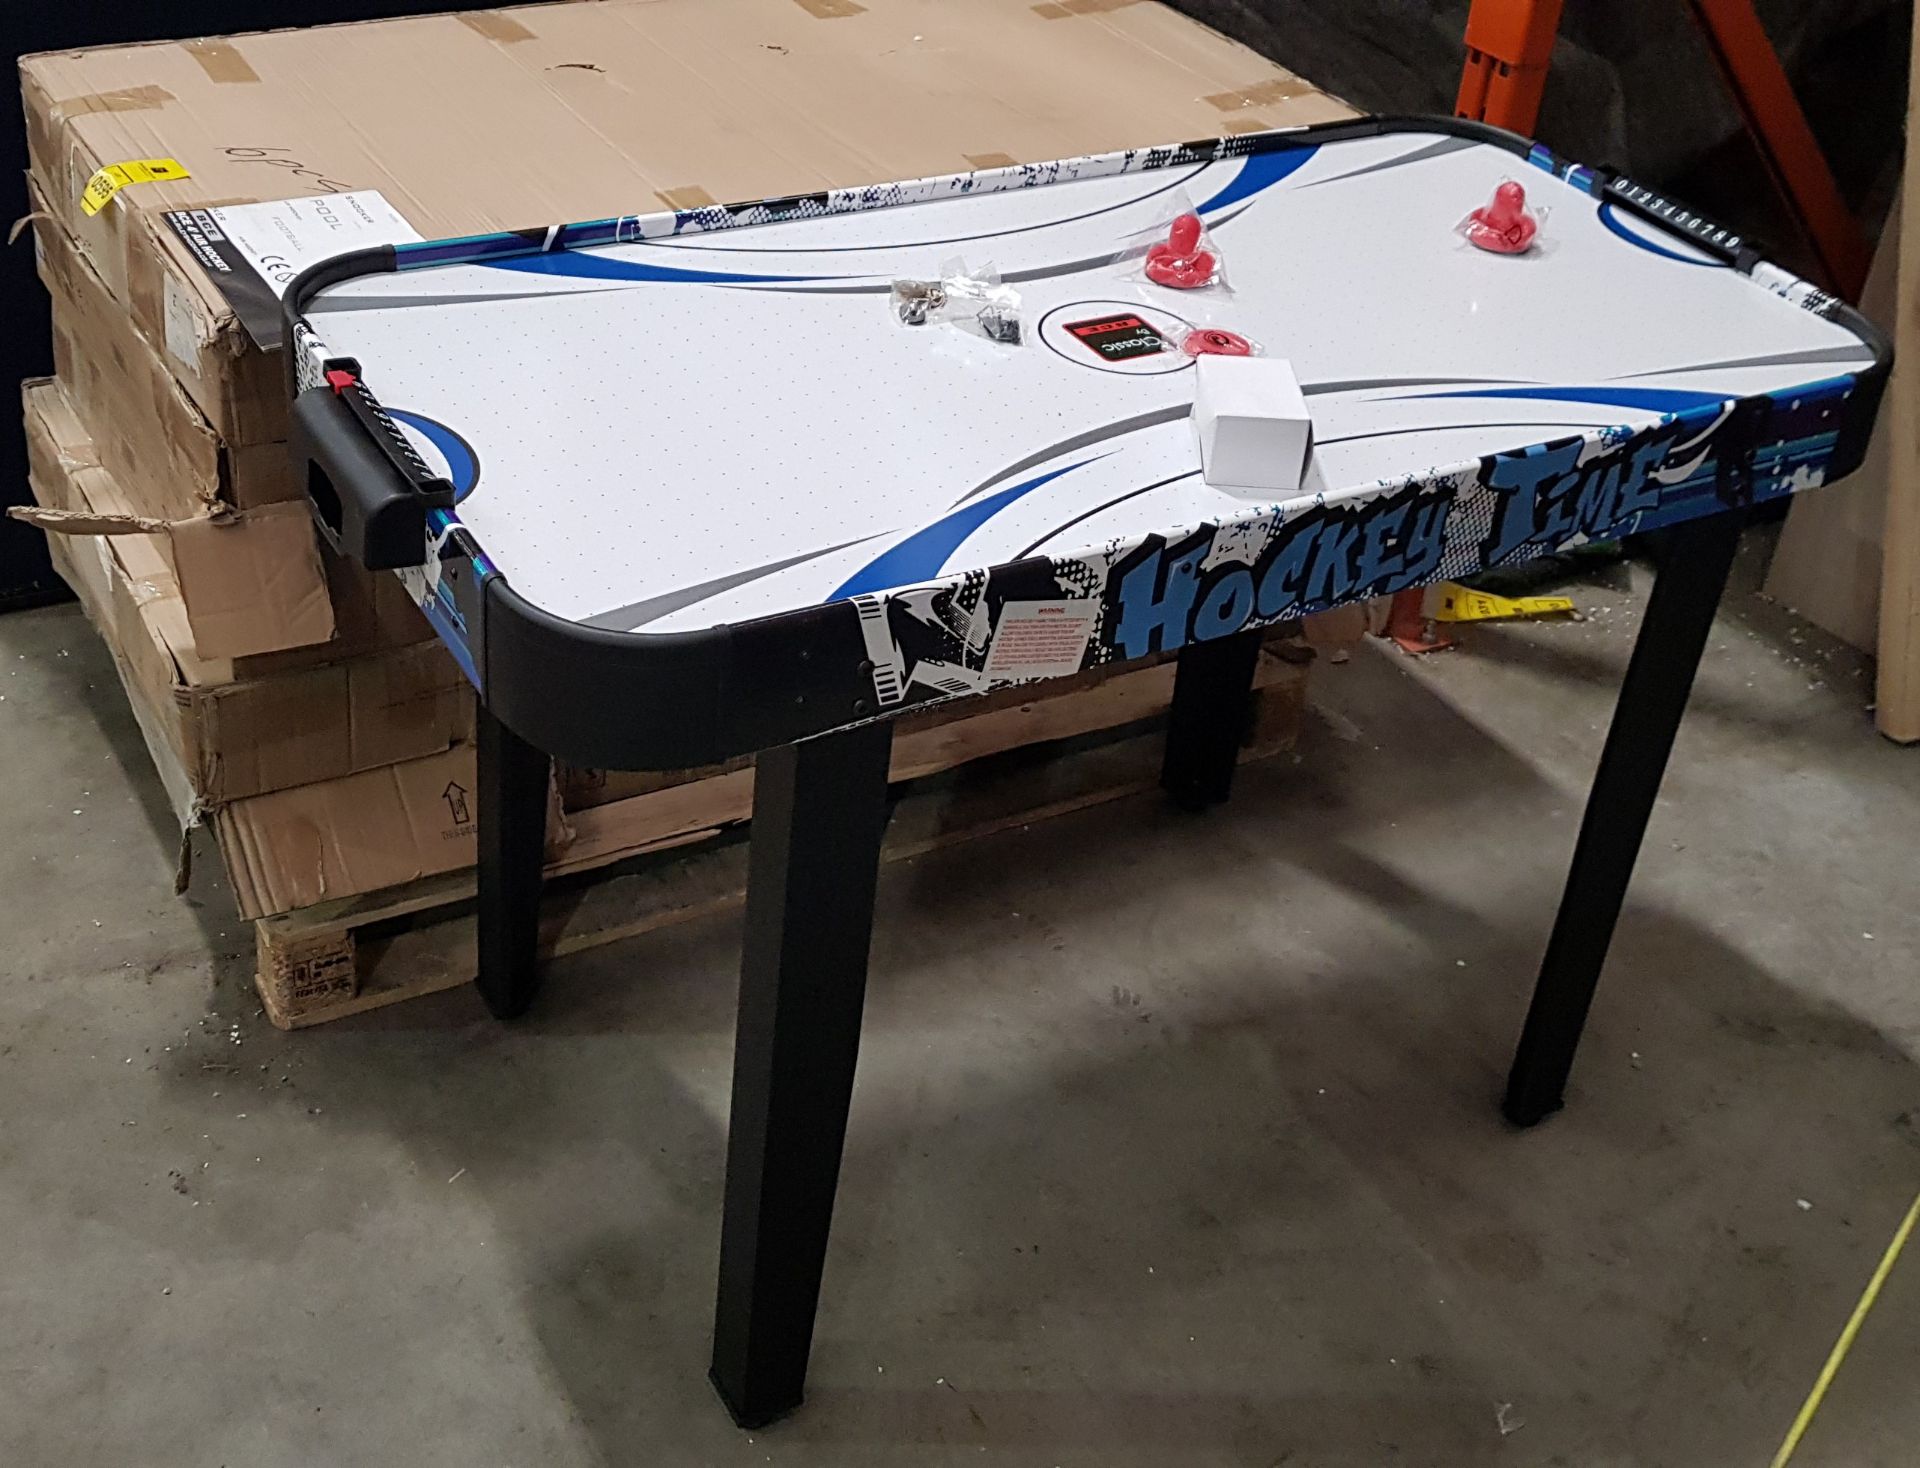 6 X BRAND NEW BOXED BCE 4 FT AIR HOCKEY TABLE INCLUDES SCORER / PUSHERS AND PUCKS SIZE 120 CM X 60